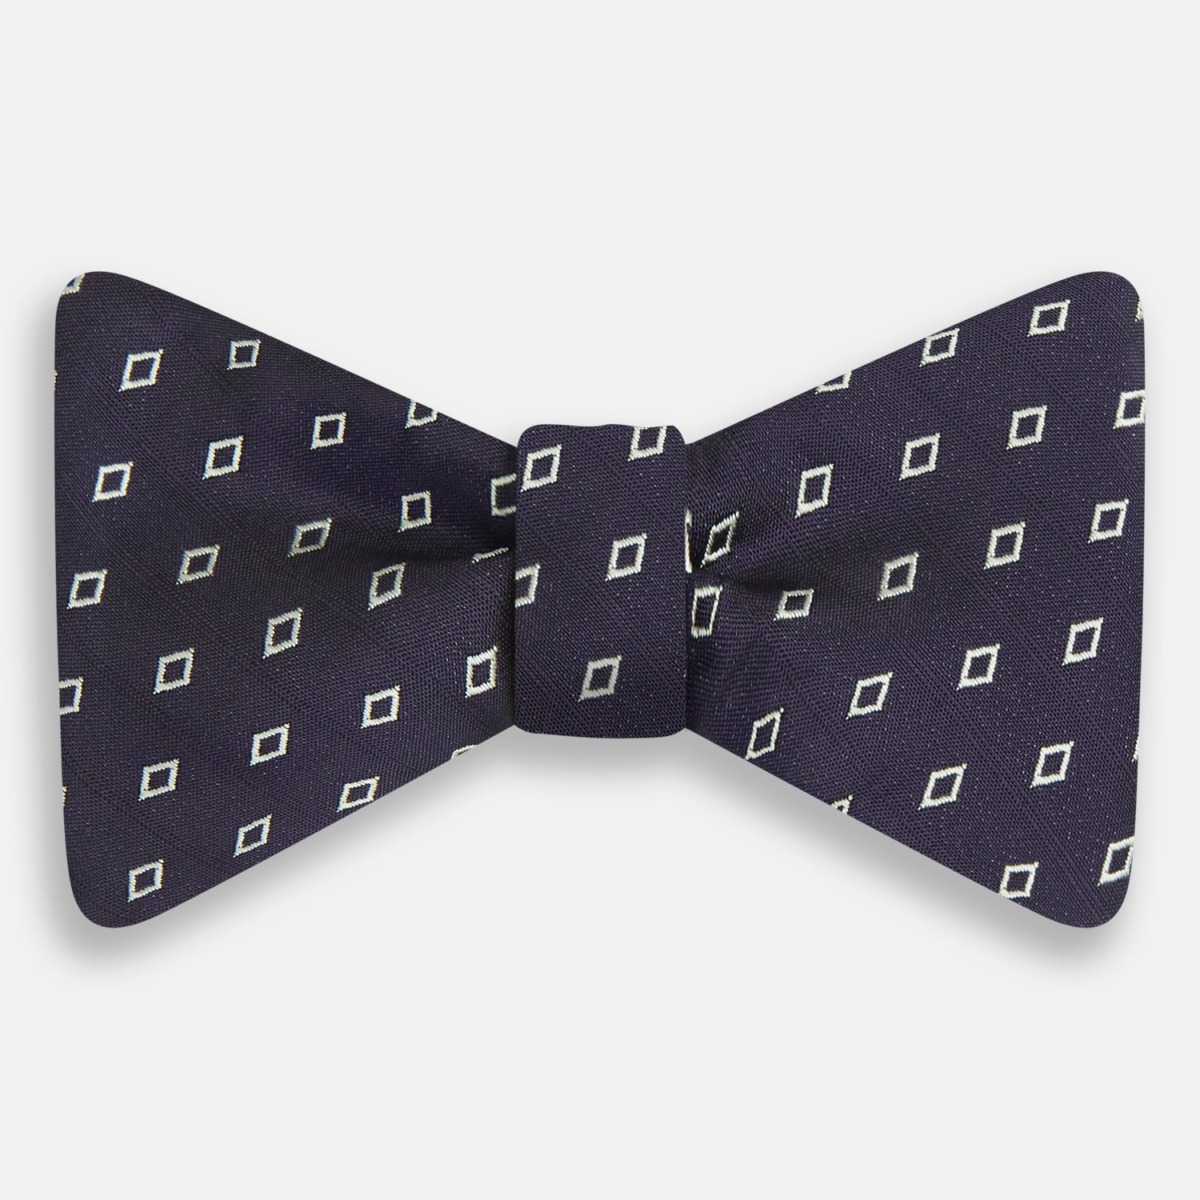 Turnbull And Asser Gents Bow Tie Blue from Turnbull & Asser GOOFASH